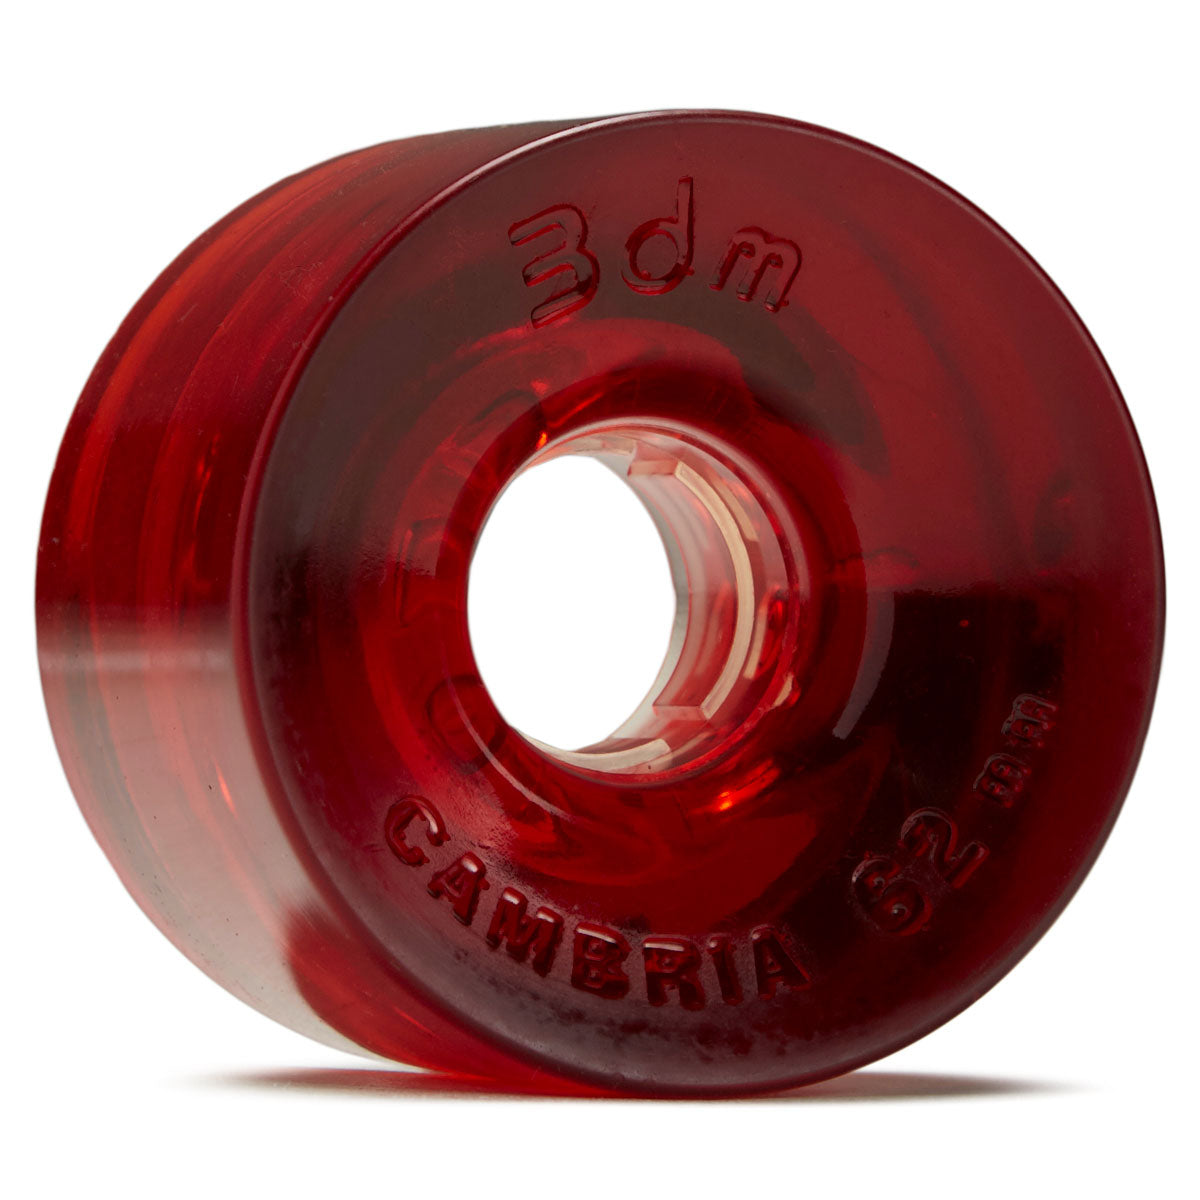 3DM Cambria 80a Longboard Wheels - Clear Red - 62mm image 1